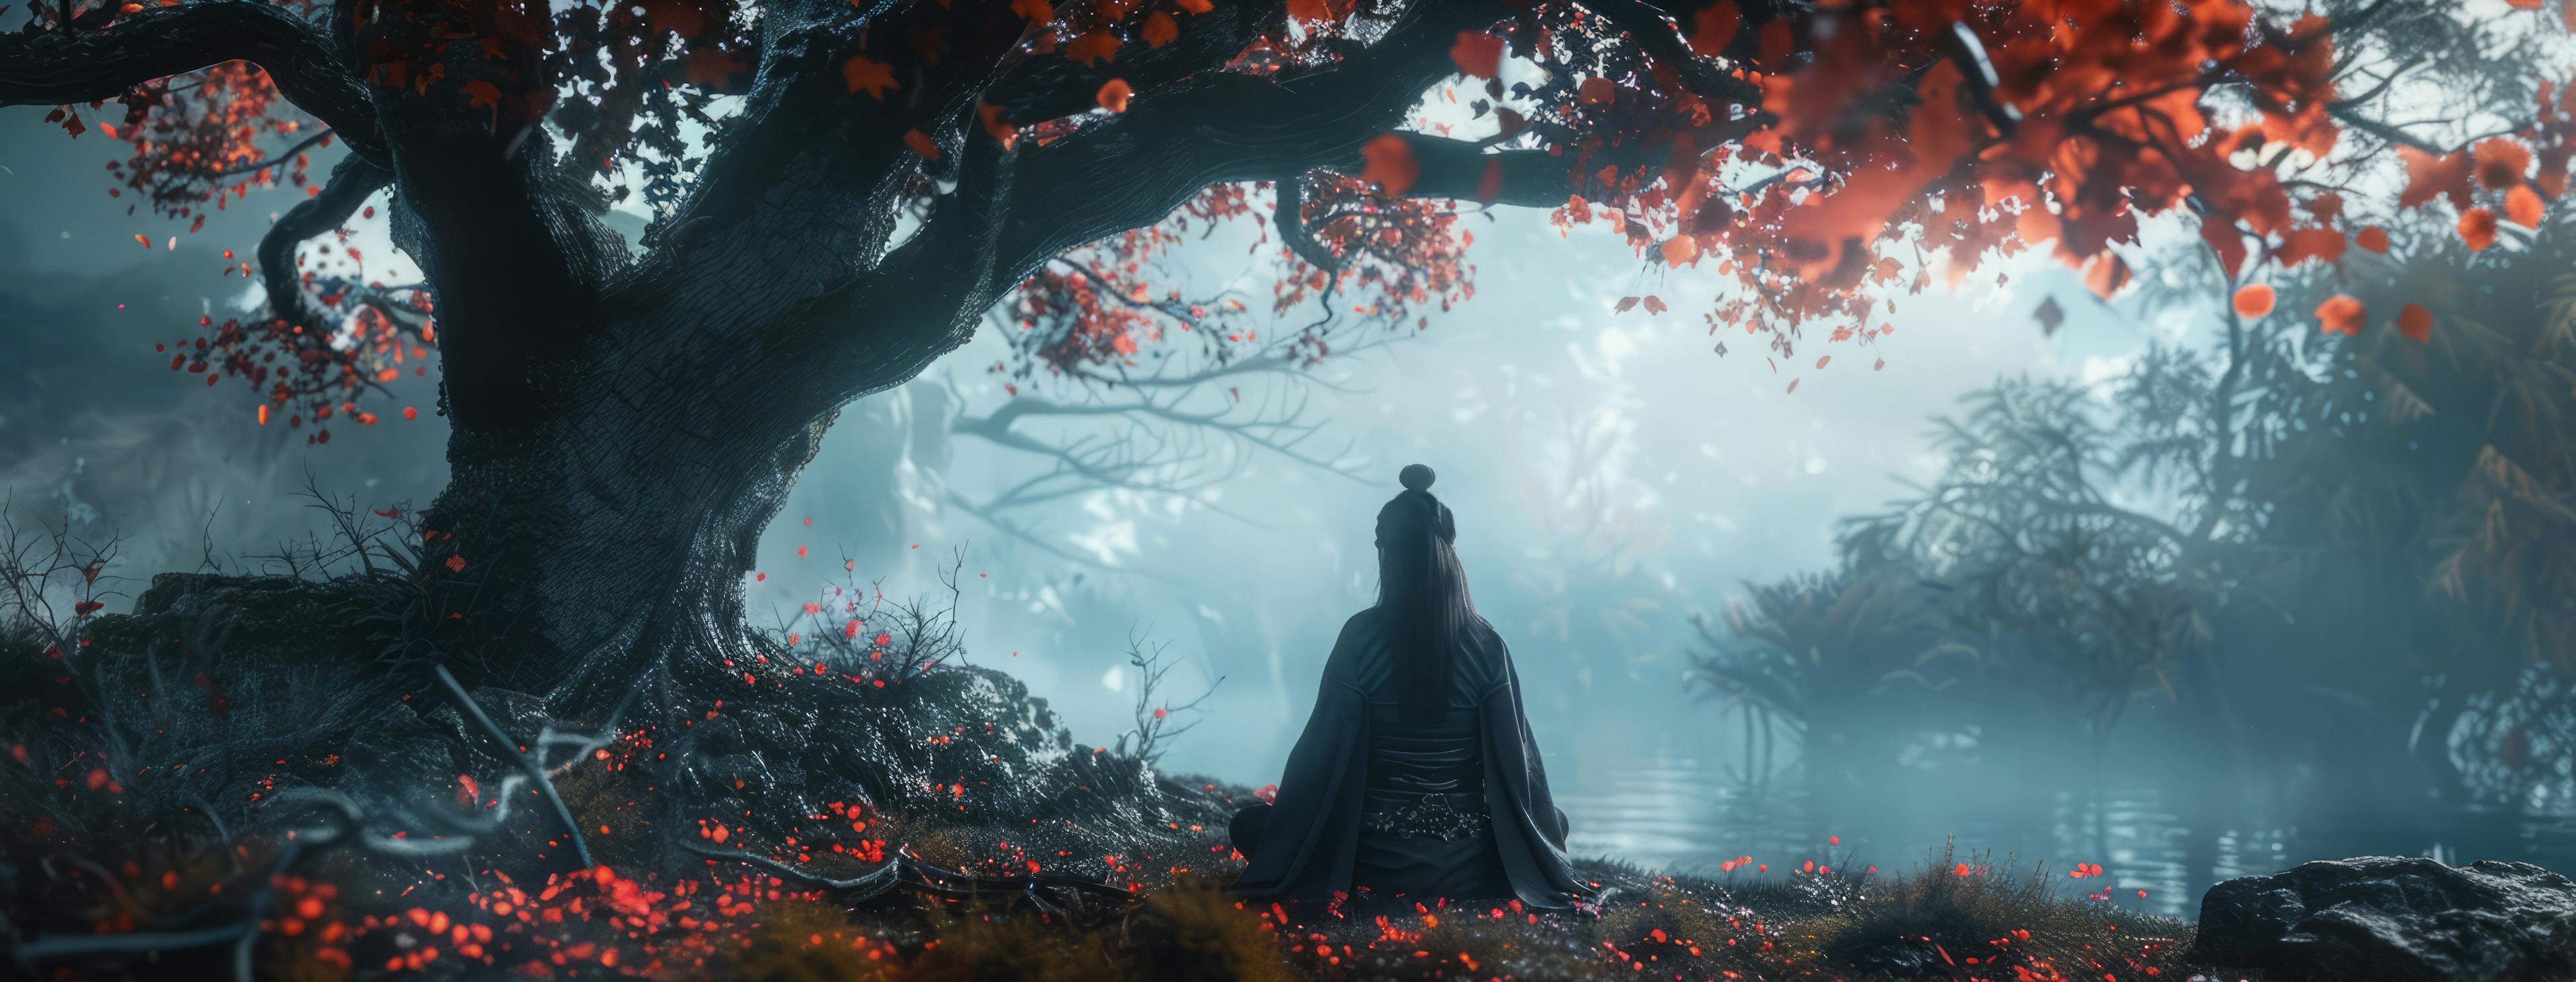 featured image - The Epitome of Loyalty Marketing, Samurais and The Bushido Code